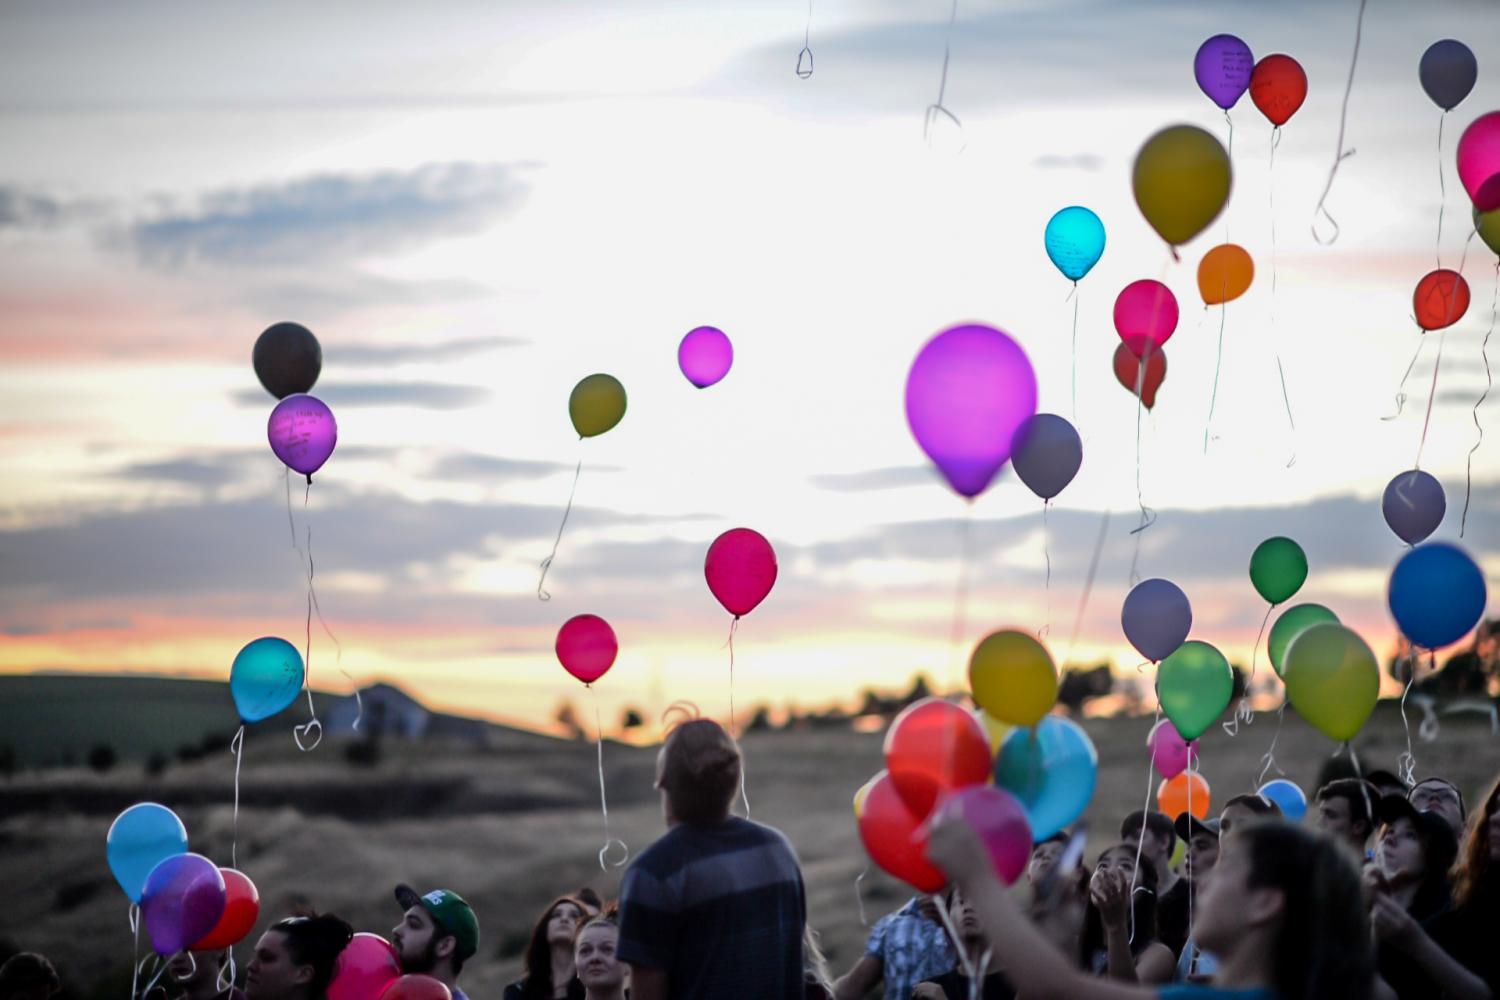 Friends and family members of Tim Reeves release balloons in remembrance Thursday night at Conservation Park in Pullman.